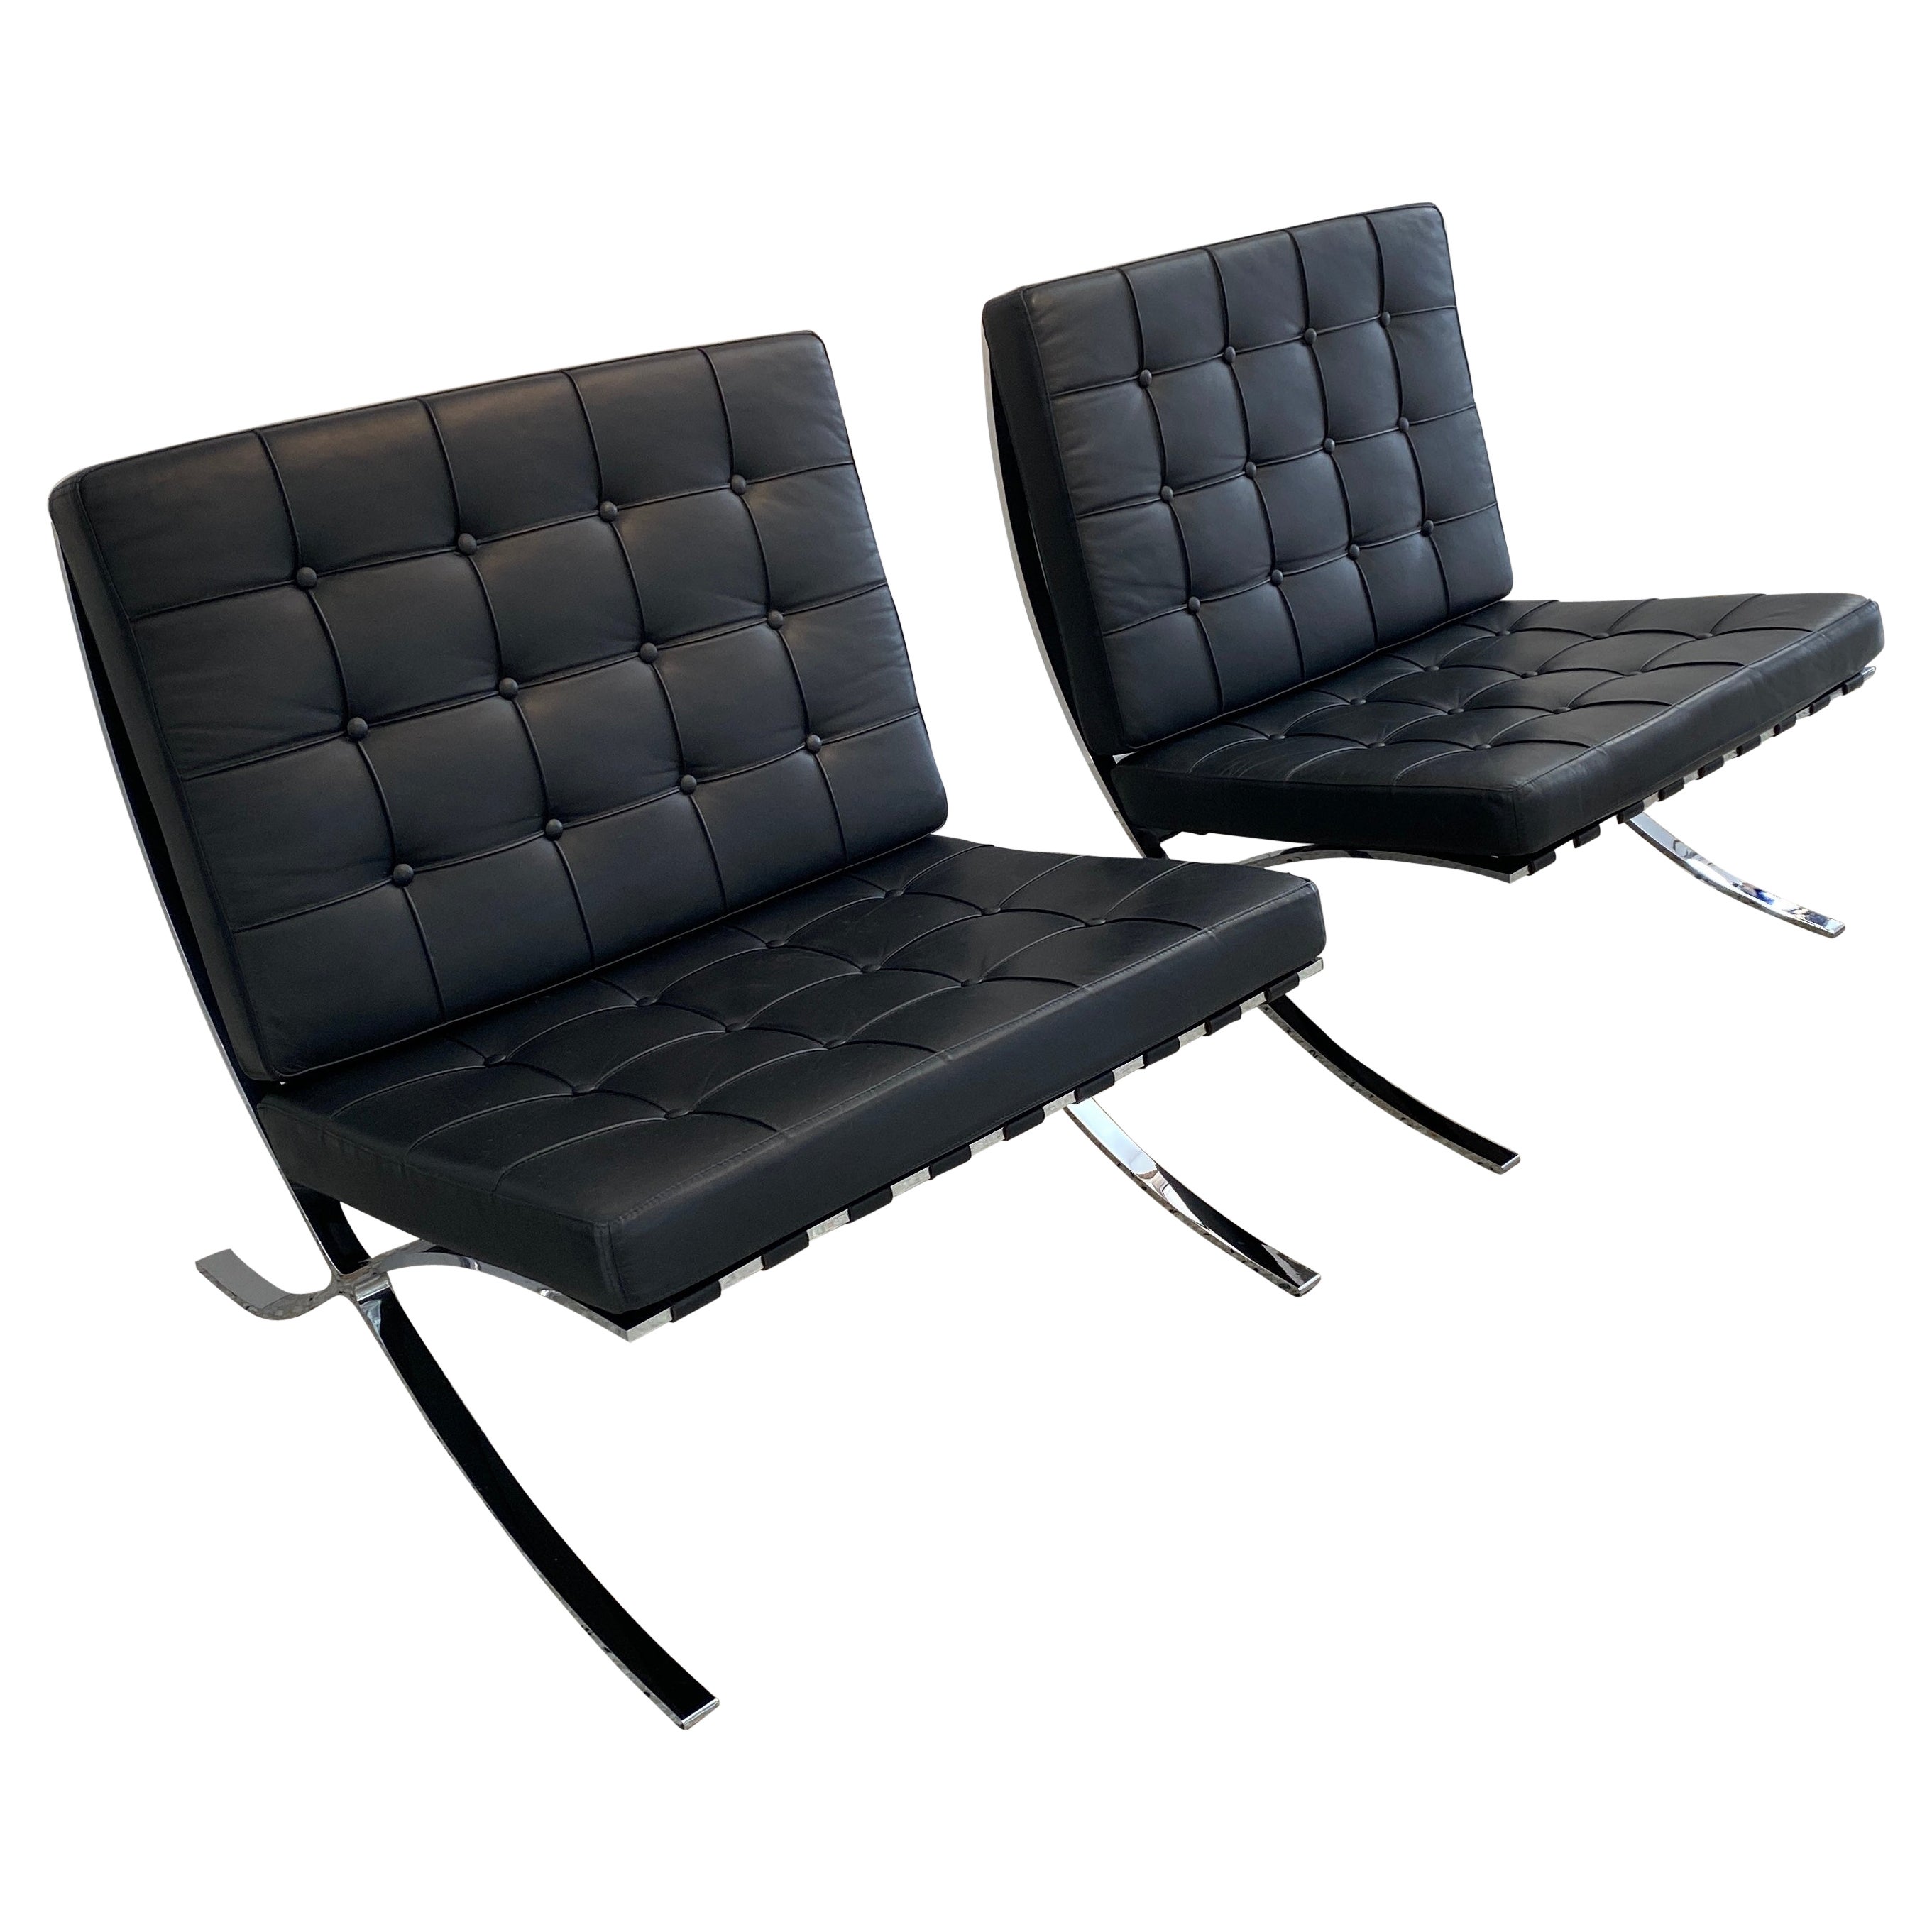 Pair of Barcelona Style Lounge Chairs by Fascm International